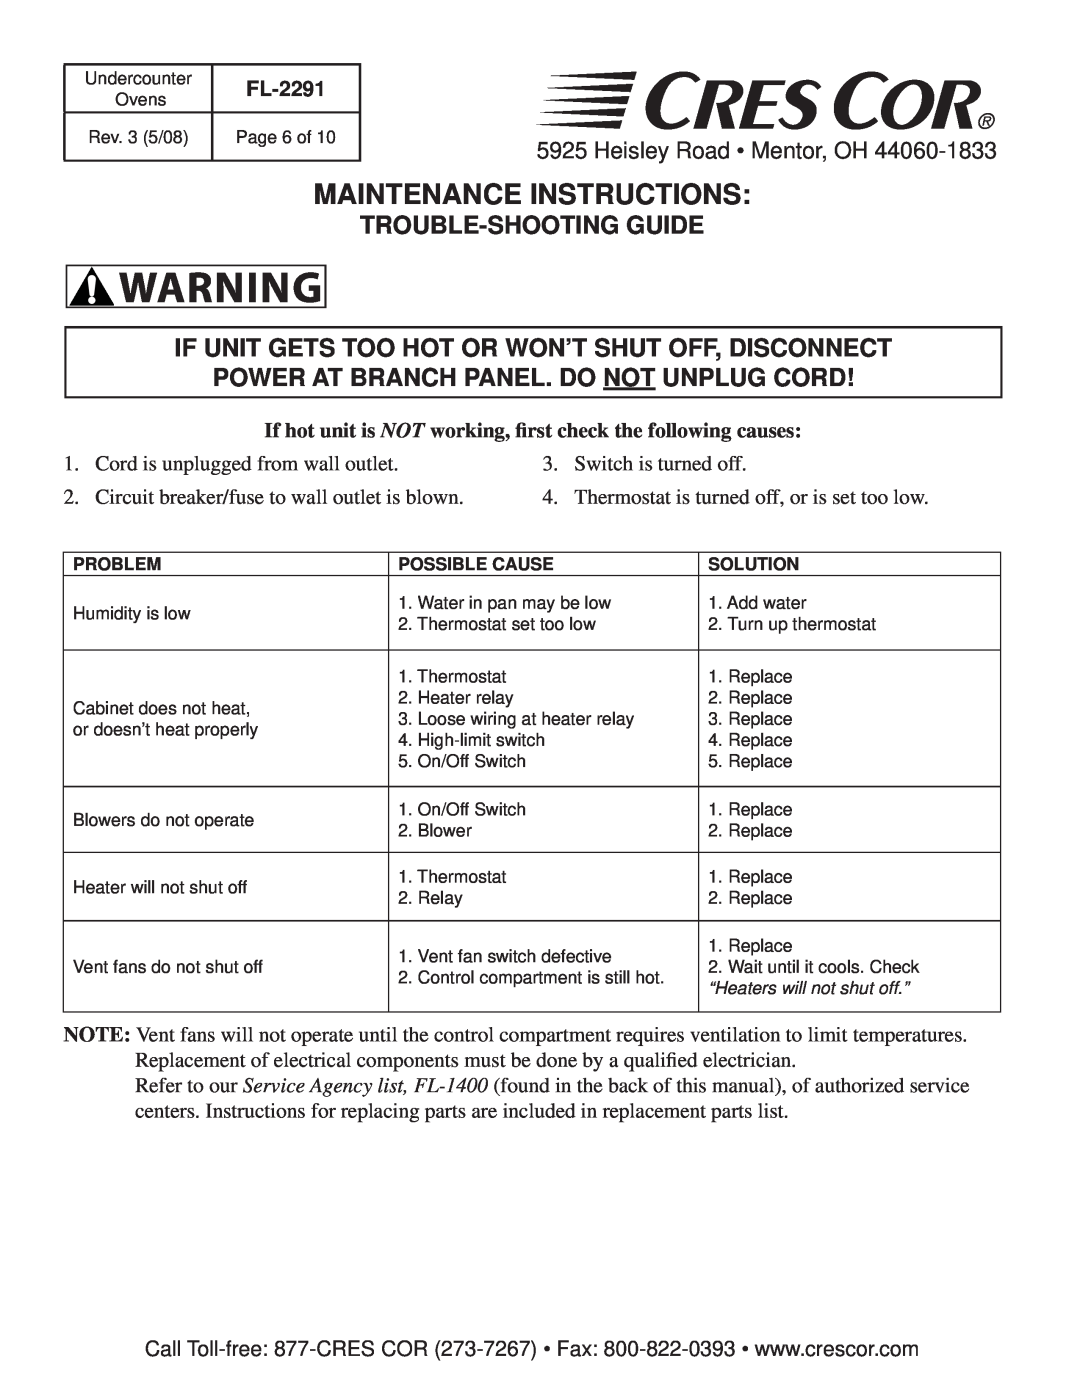 Cres Cor FL-2291 Maintenance Instructions, Trouble-Shooting Guide, If Unit Gets Too Hot Or Won’T Shut Off, Disconnect 